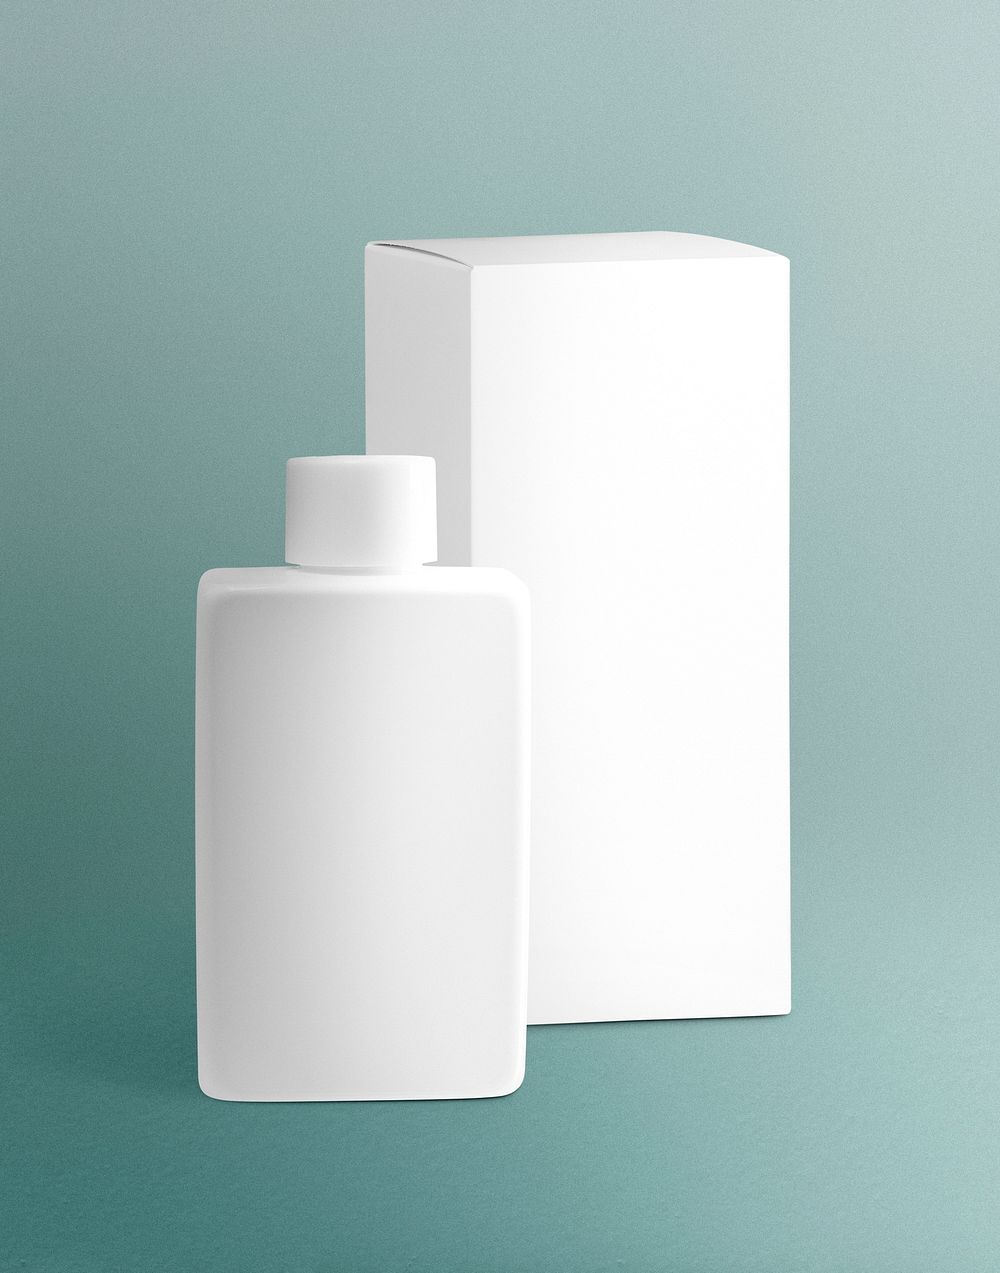 Hand wash bottle product packaging in minimal design